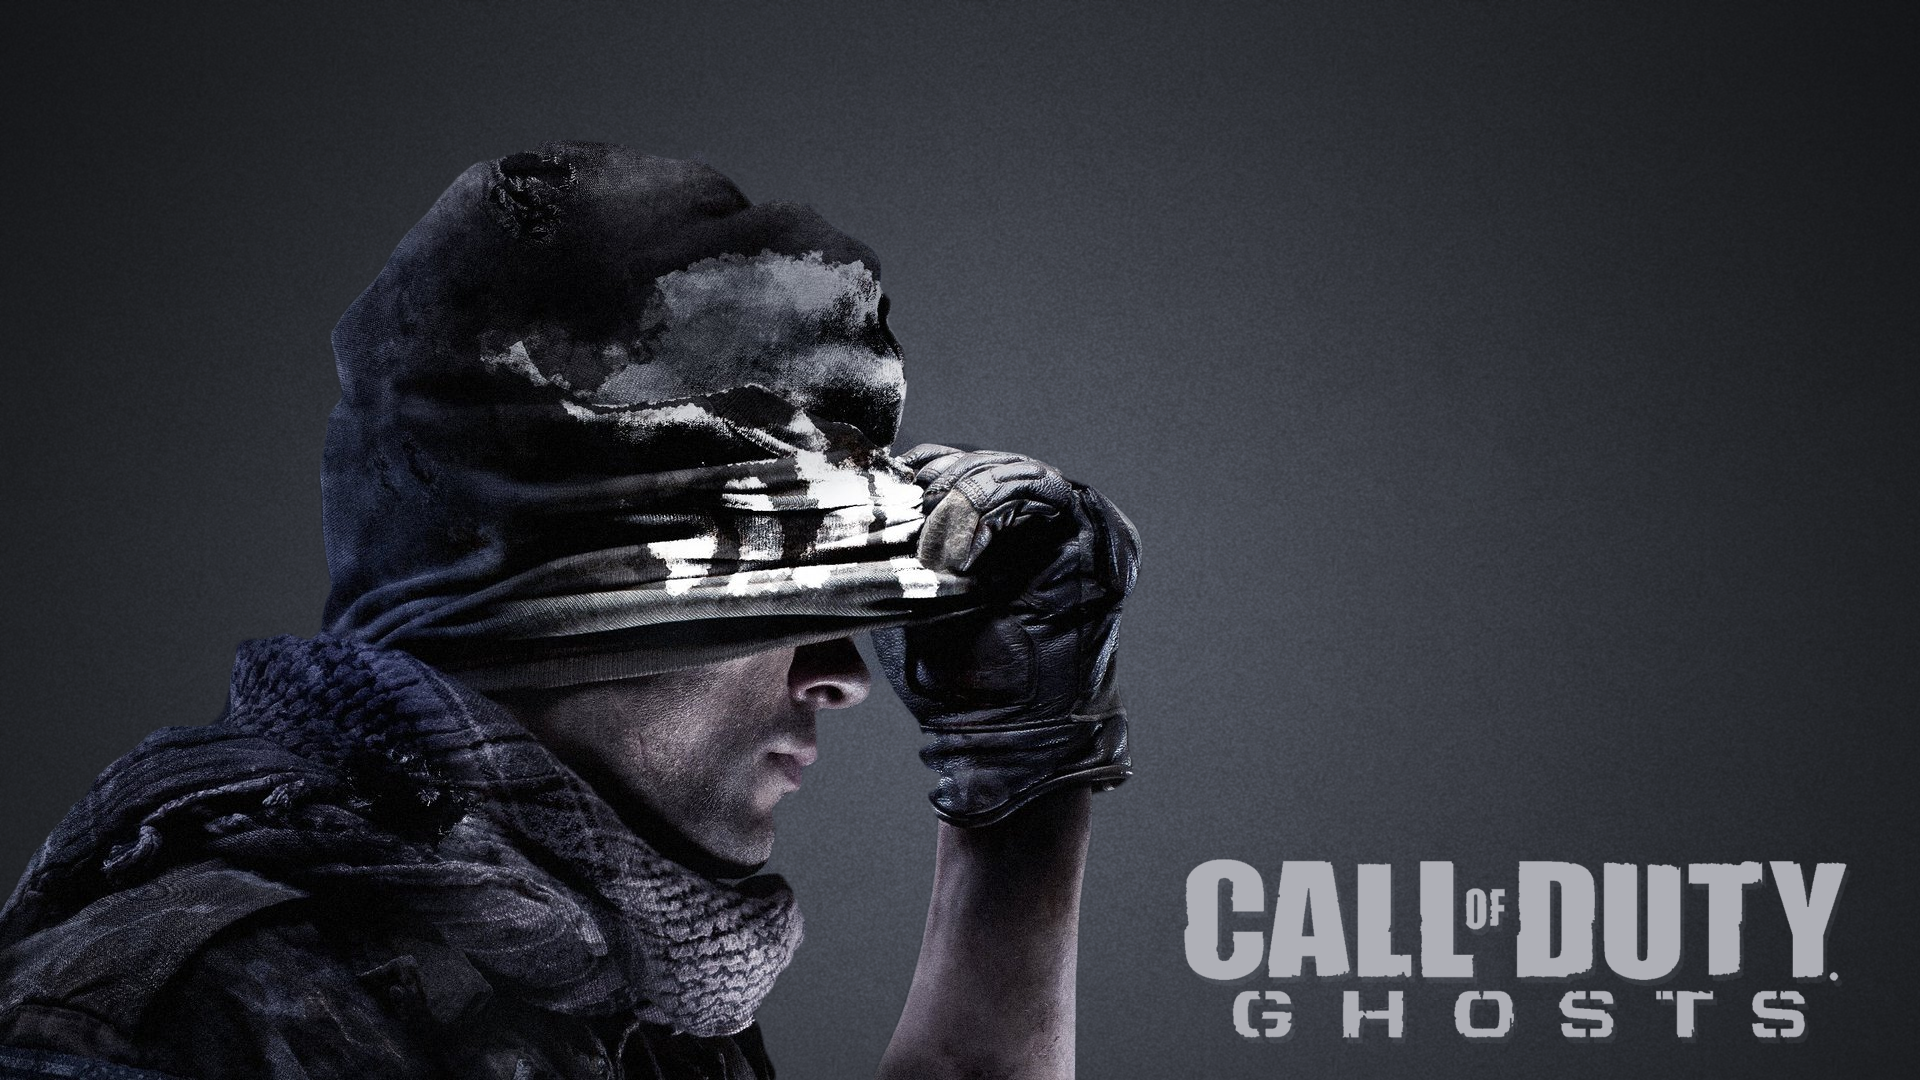 Call of Duty : Ghosts ~ Background HD 1920*1080 by raikouto on DeviantArt